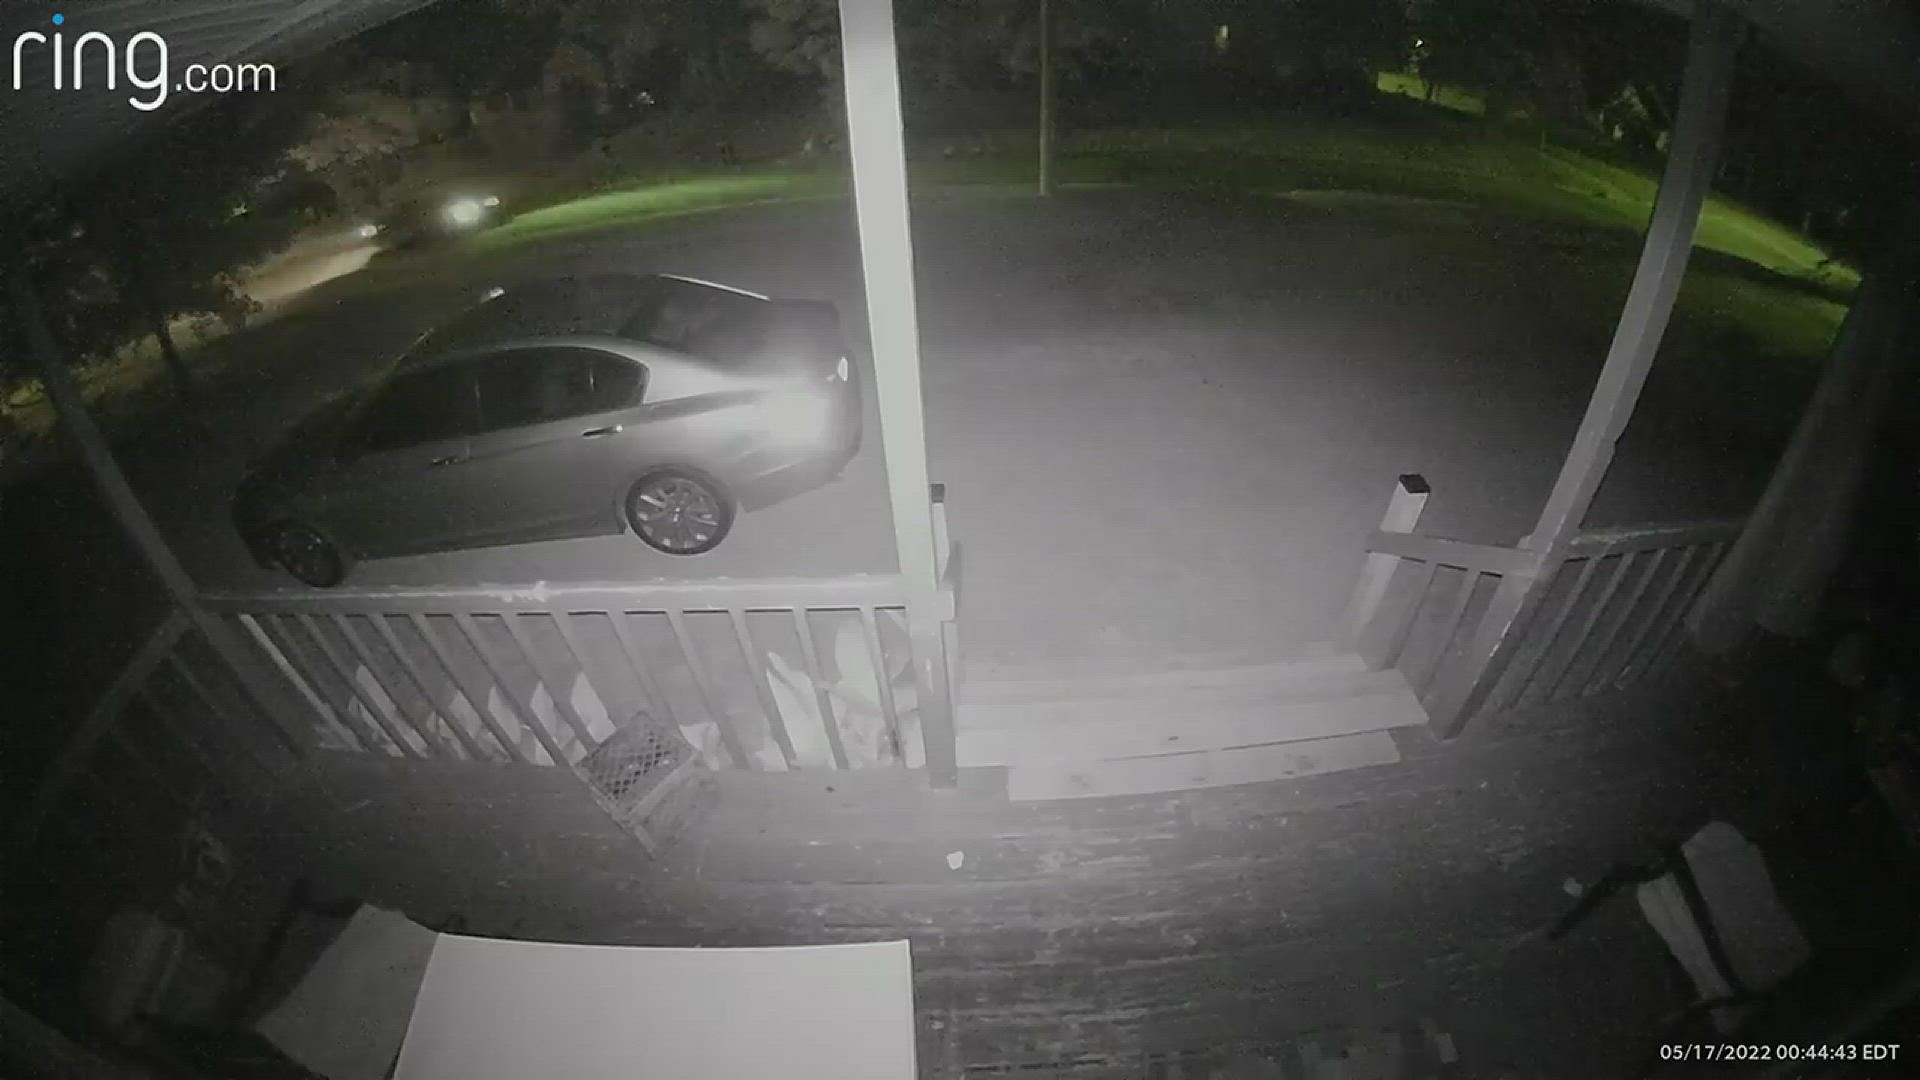 Griffin, Georgia Police are now searching for the car pictured in the surveillance video.